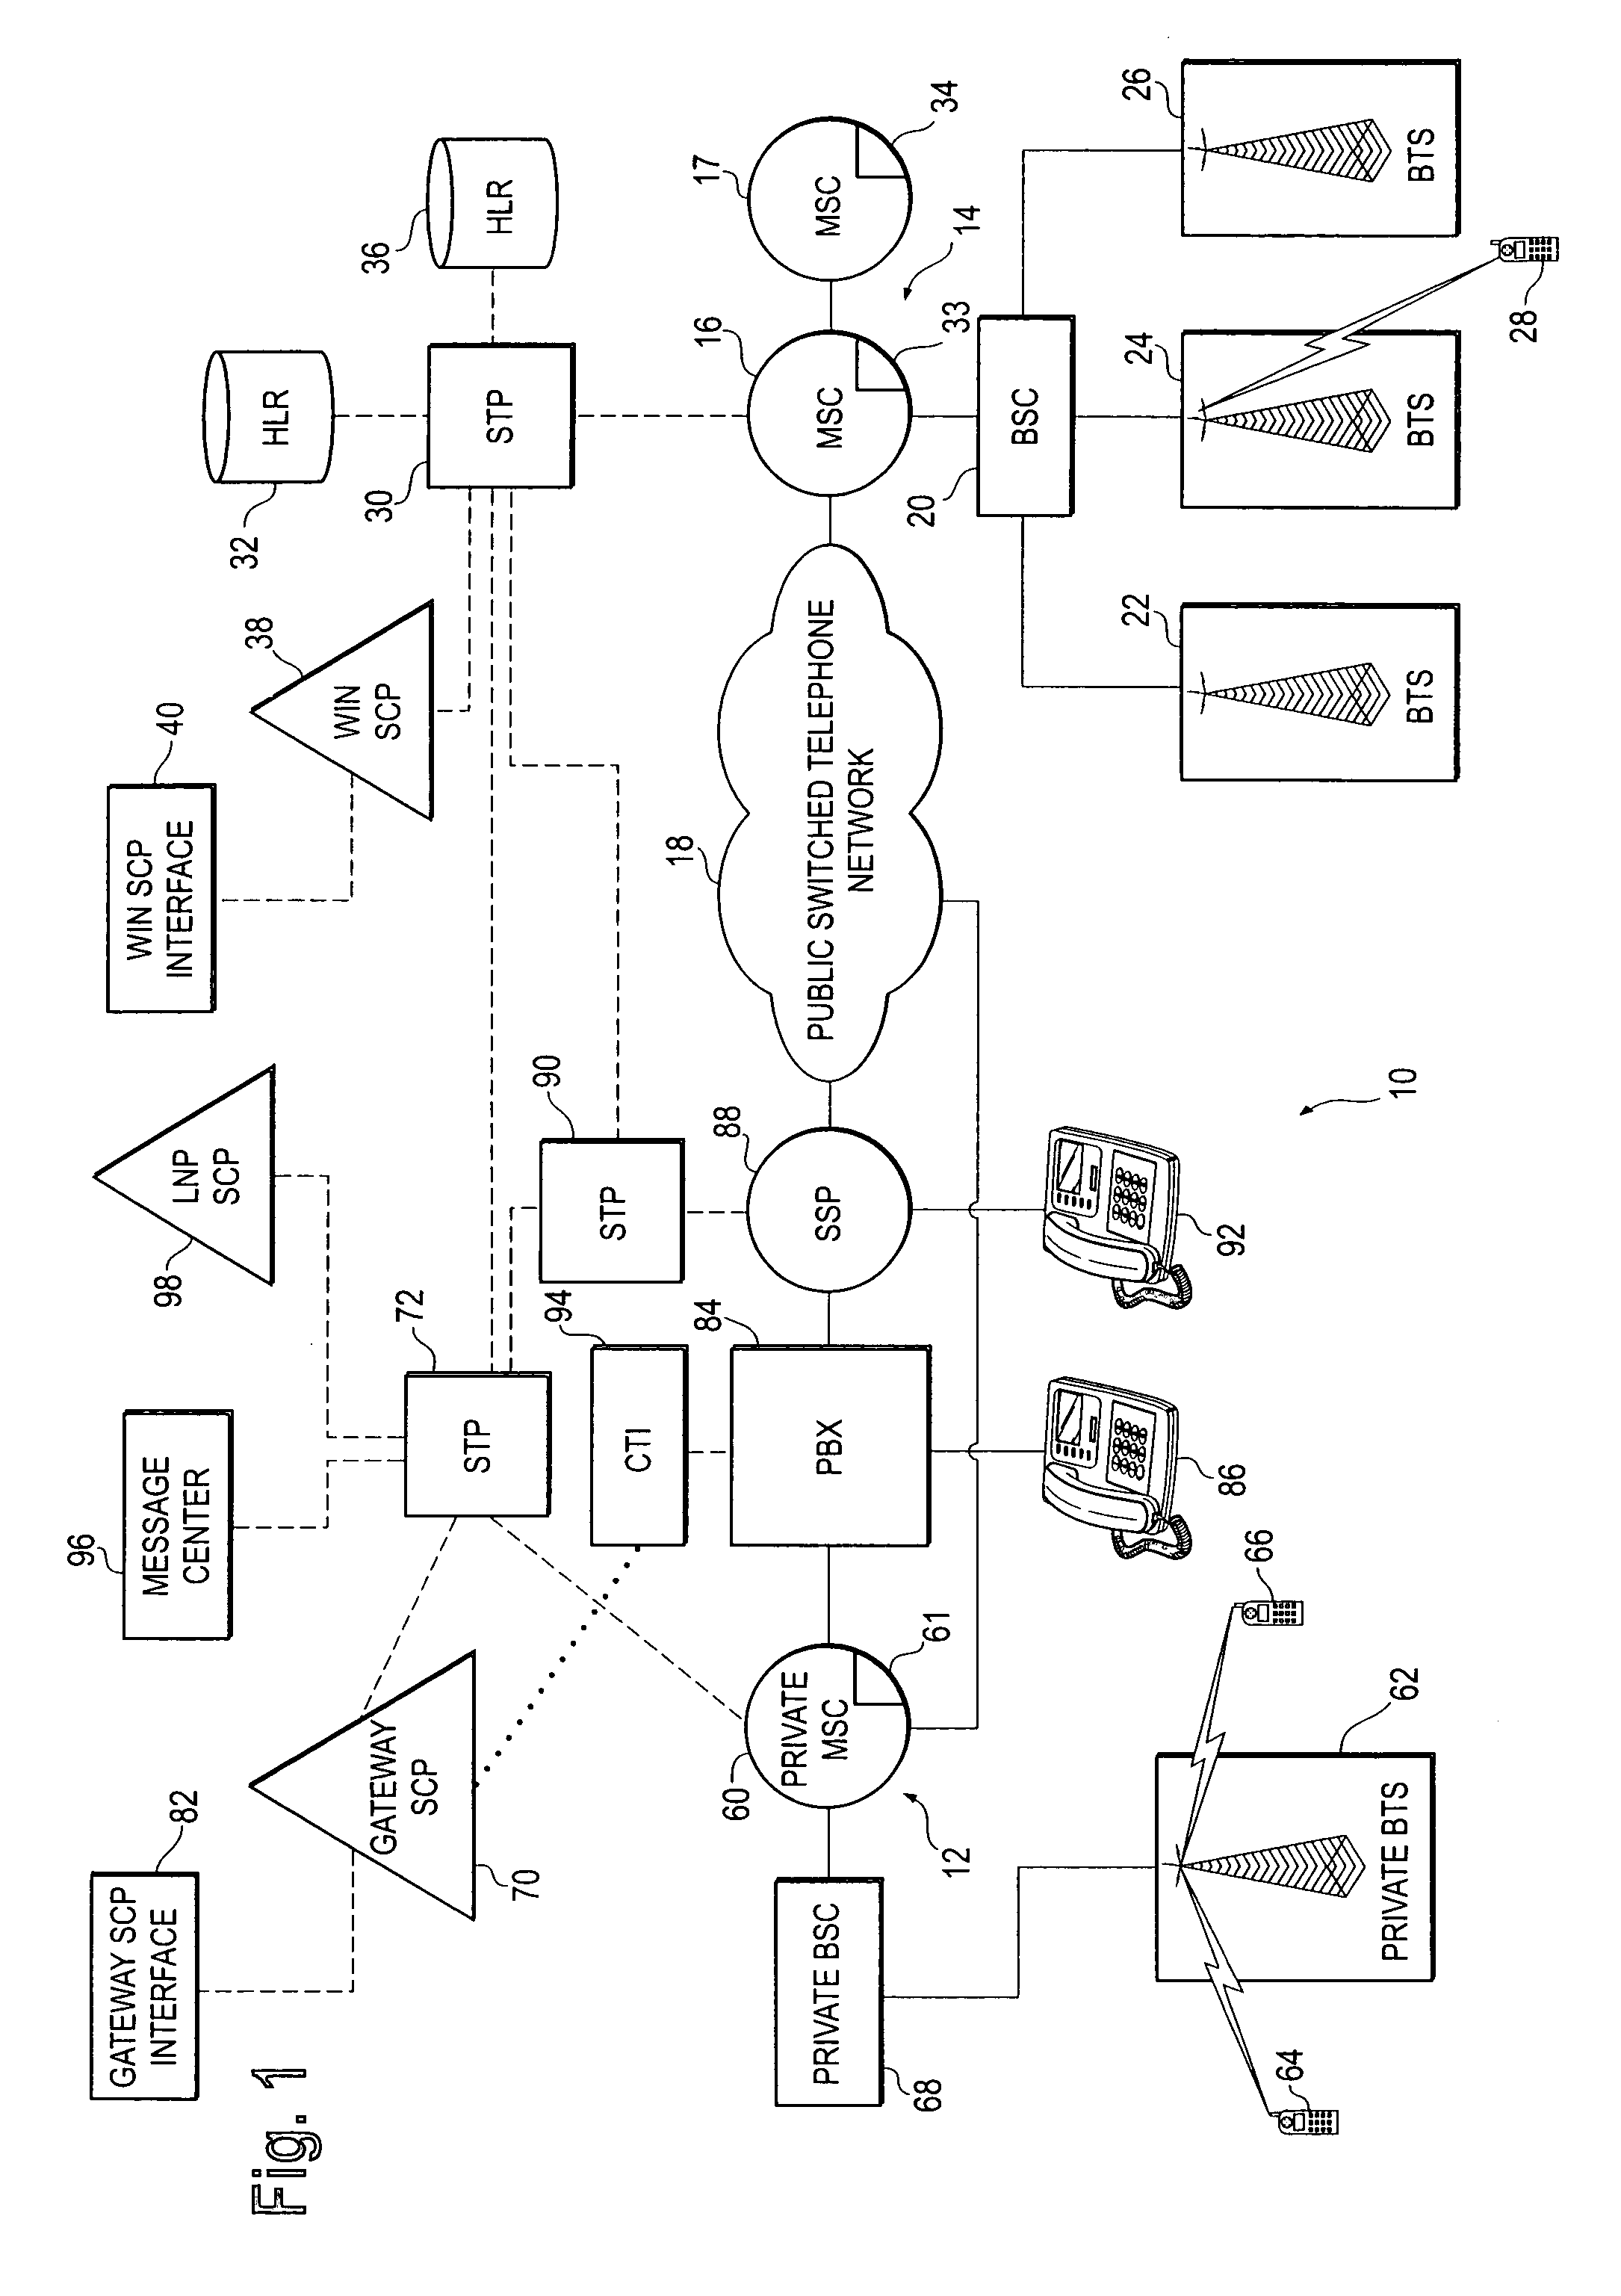 Private wireless network integrated with public wireless network